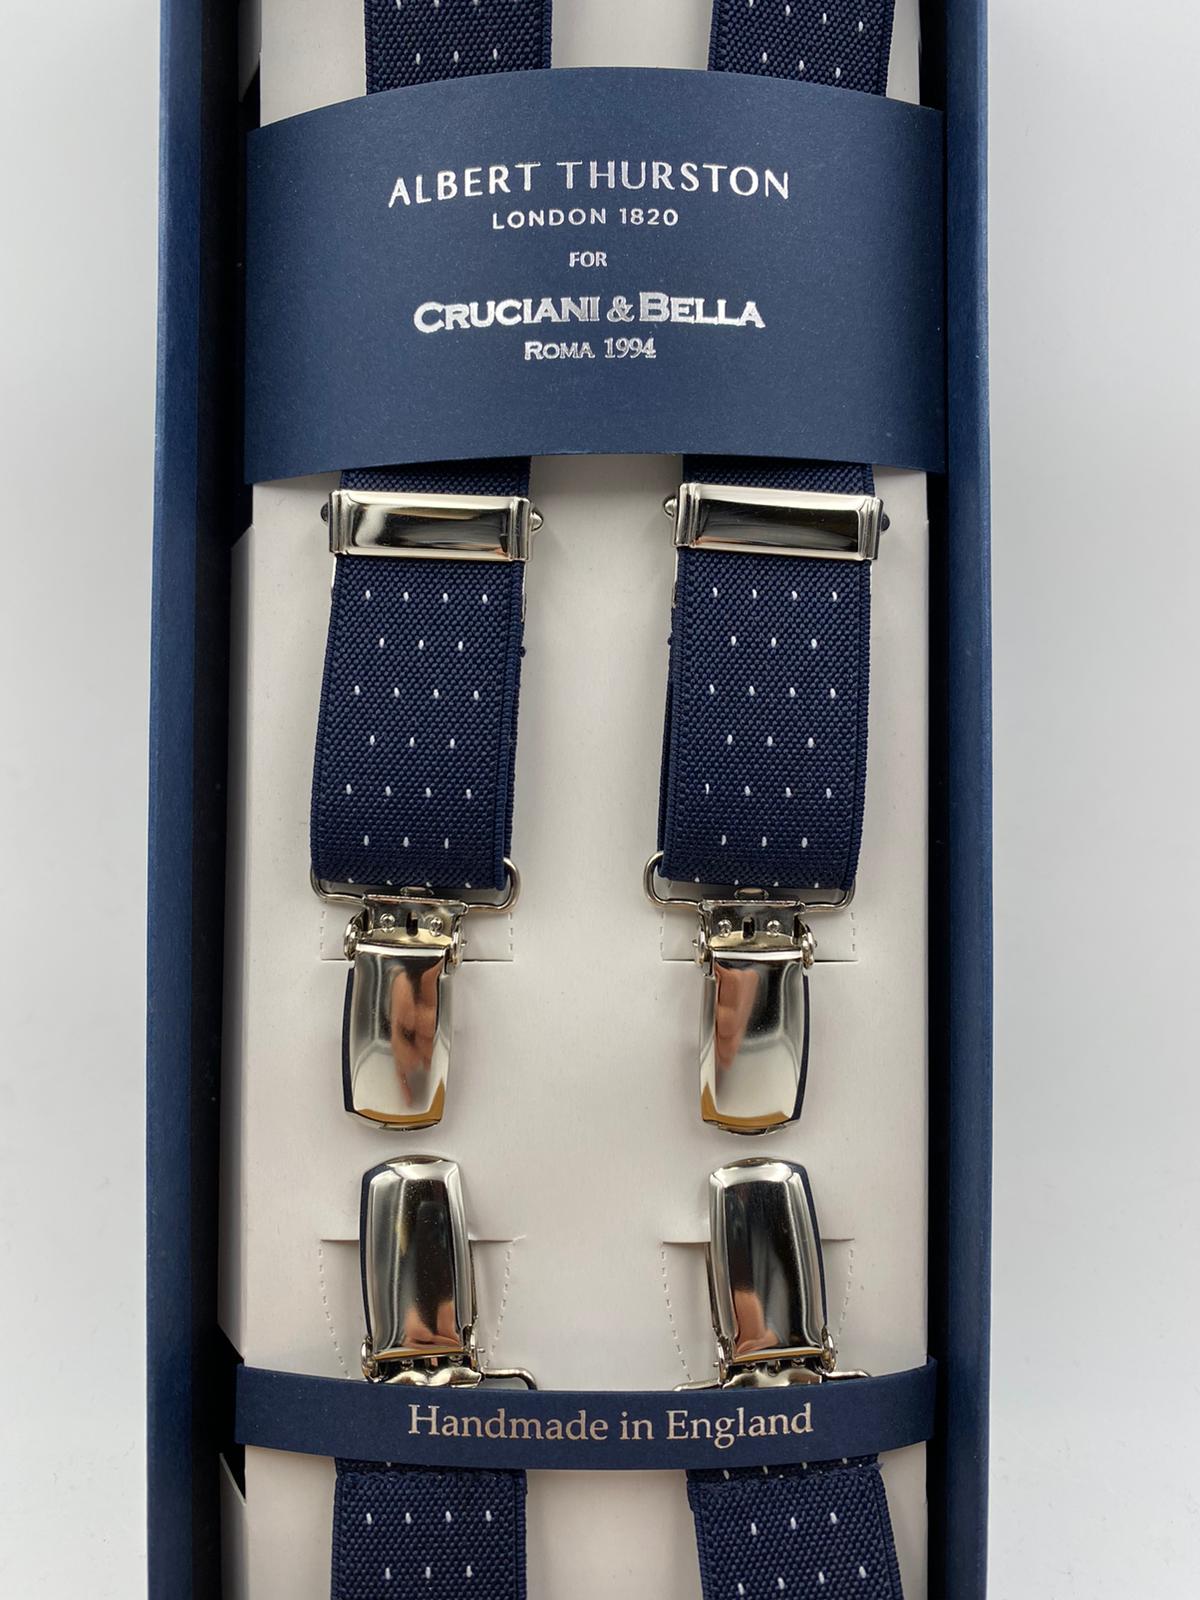 Albert Thurston for Cruciani & Bella Made in England Clip on Adjustable Sizing 25 mm elastic braces Blue whit White Dots X-Shaped Nickel Fittings Size: L #4834